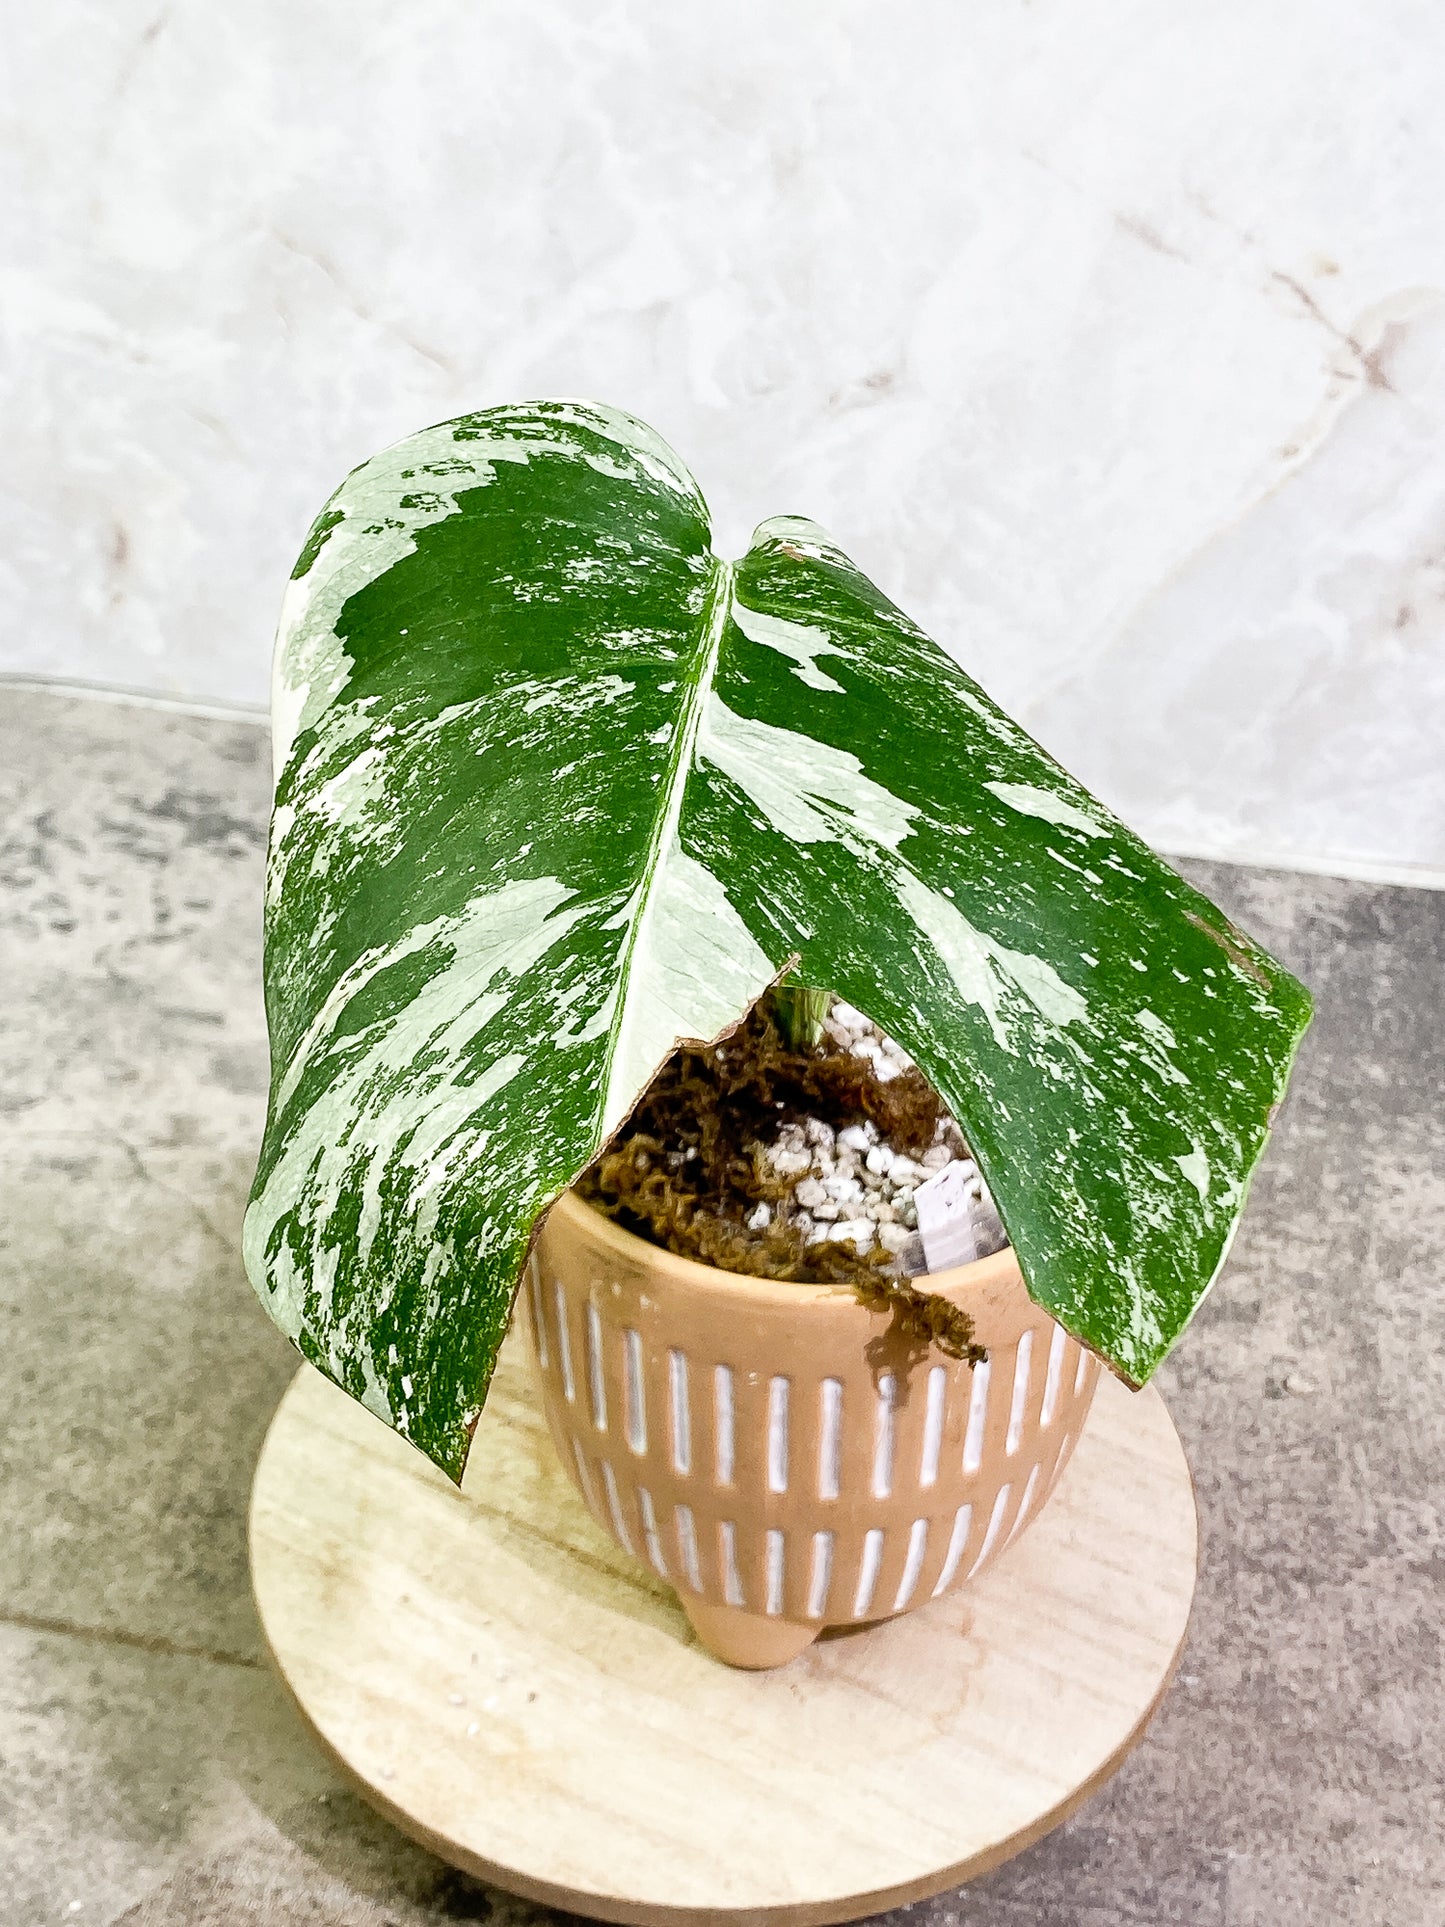 Monstera Albo Variegated 1 leaf 1 growth point fully rooted